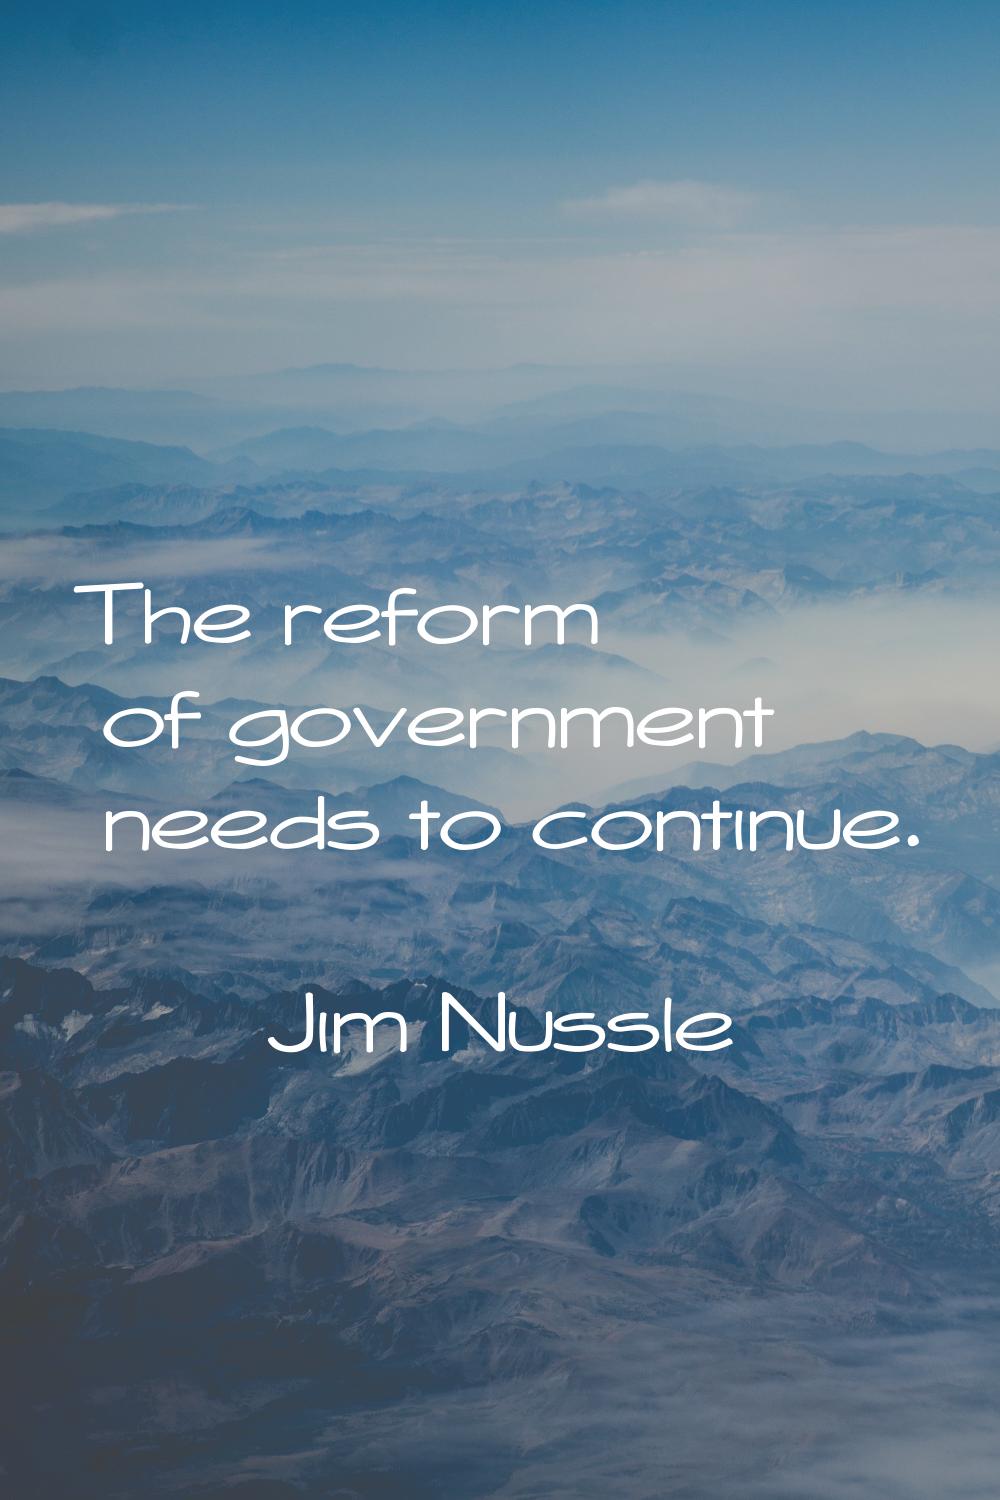 The reform of government needs to continue.